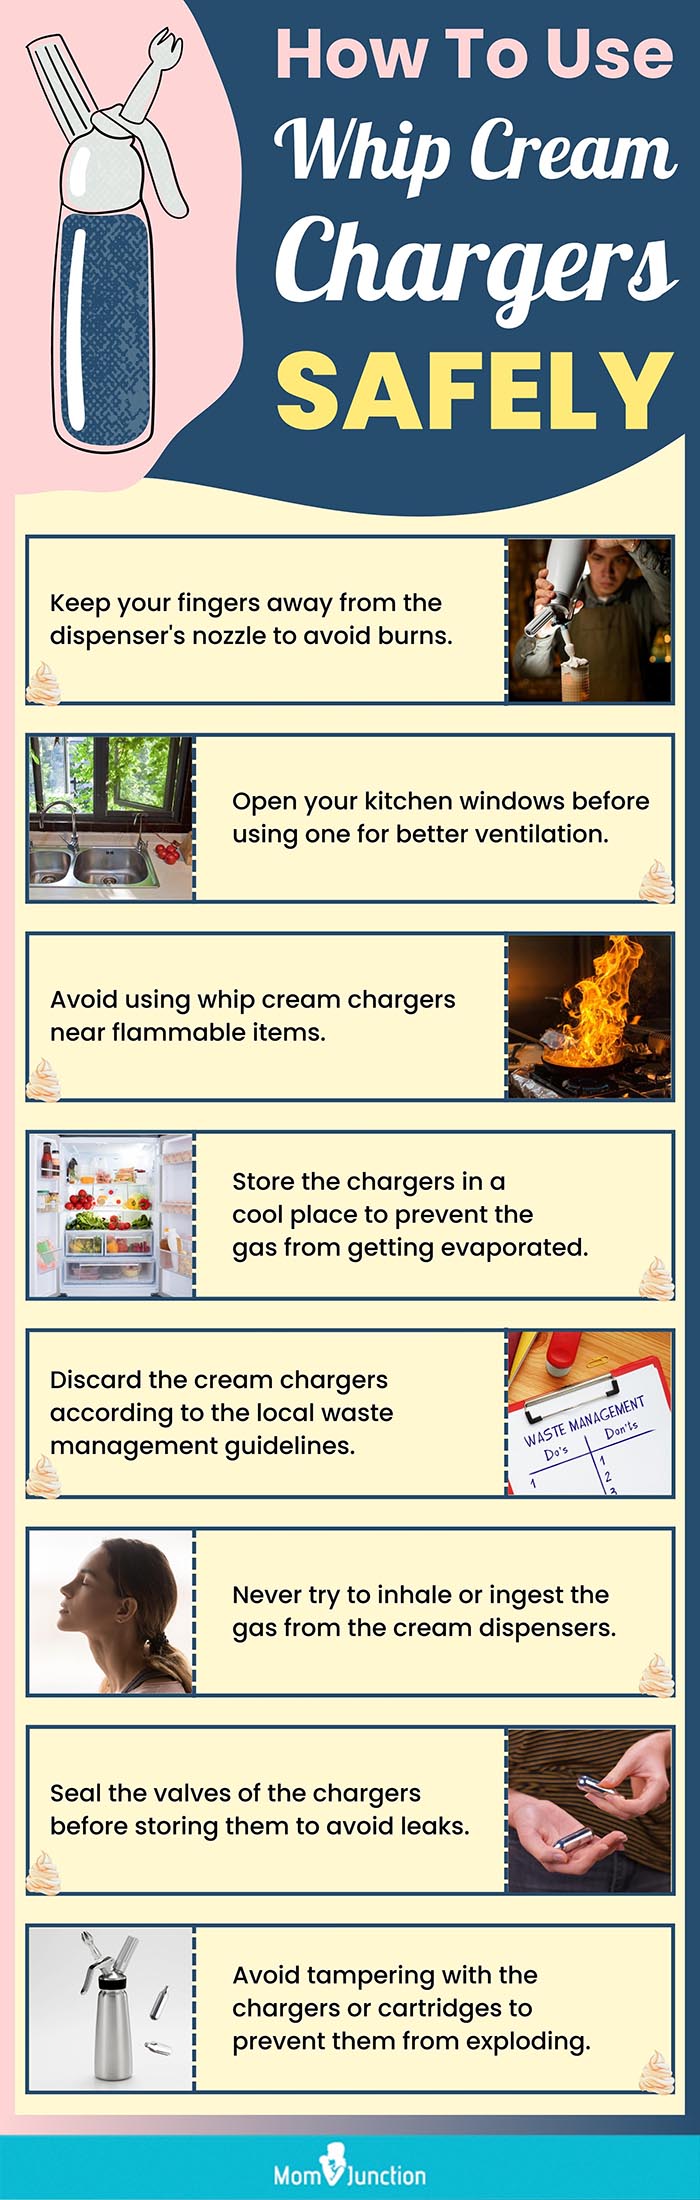 How To Use Whip Cream Chargers Safely (infographic)